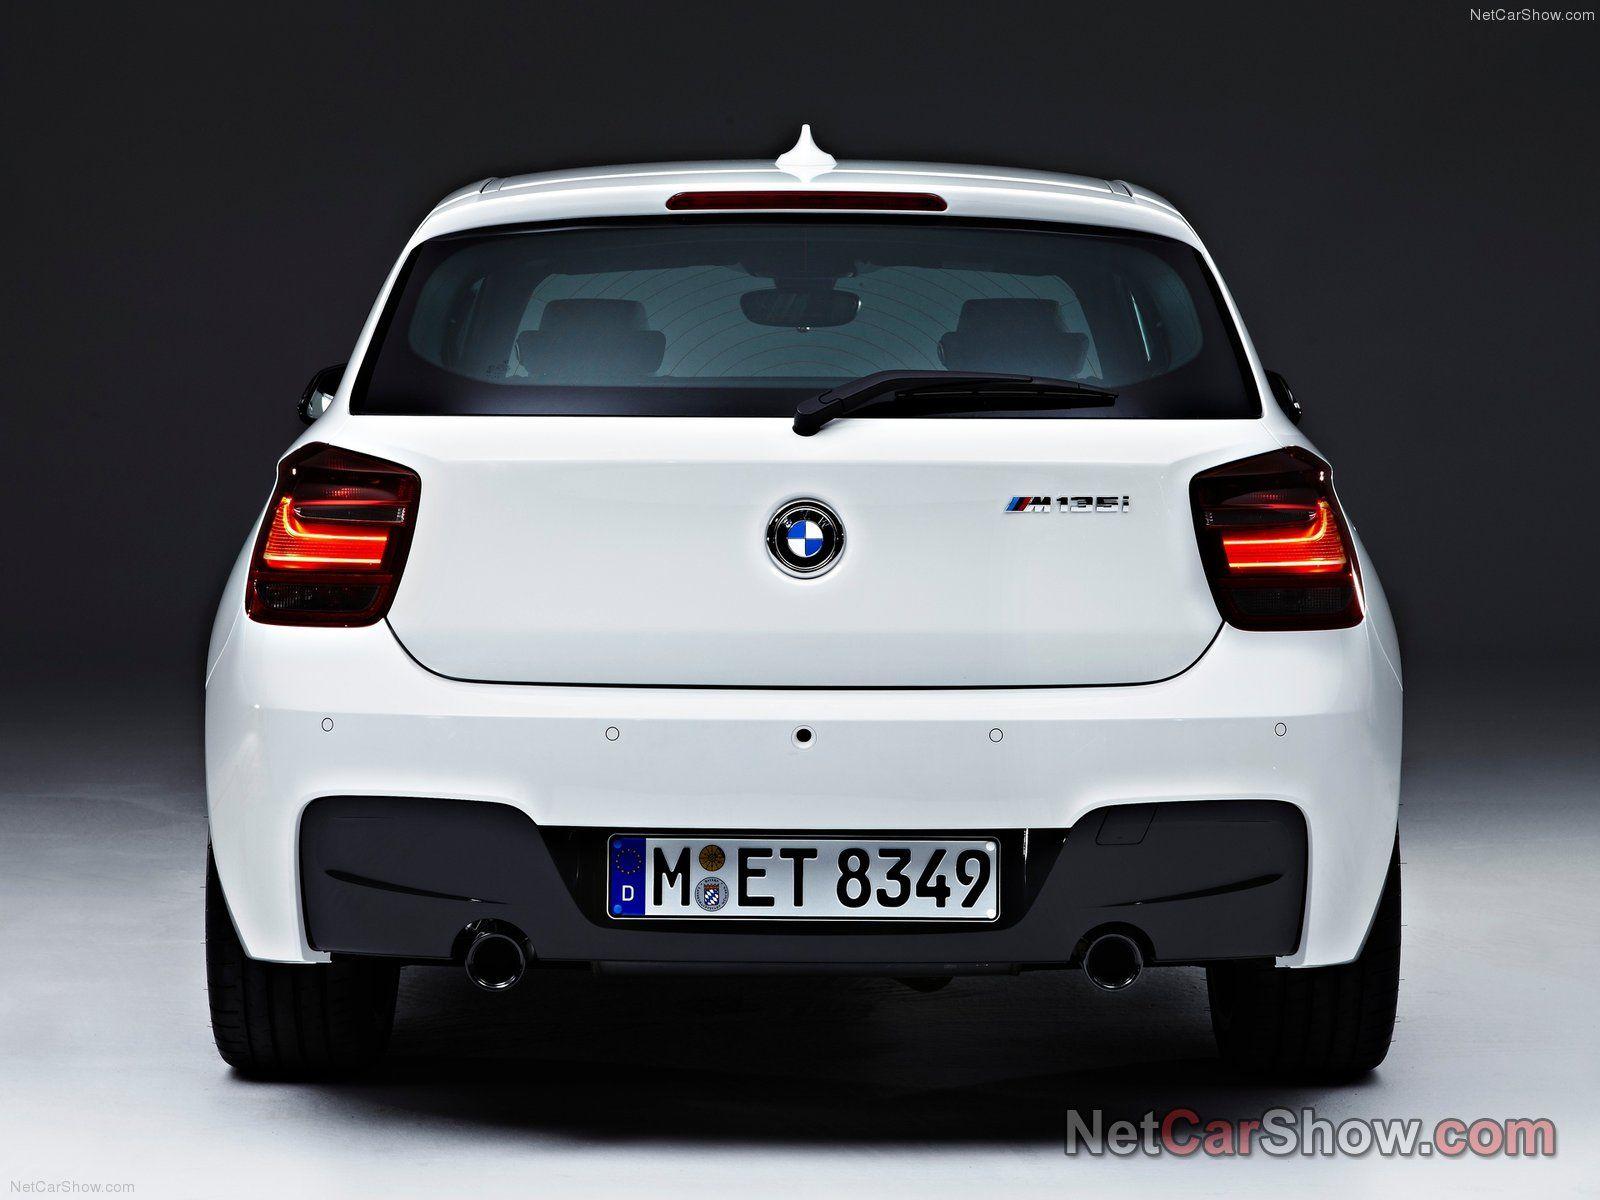 BMW M135i picture. BMW photo gallery